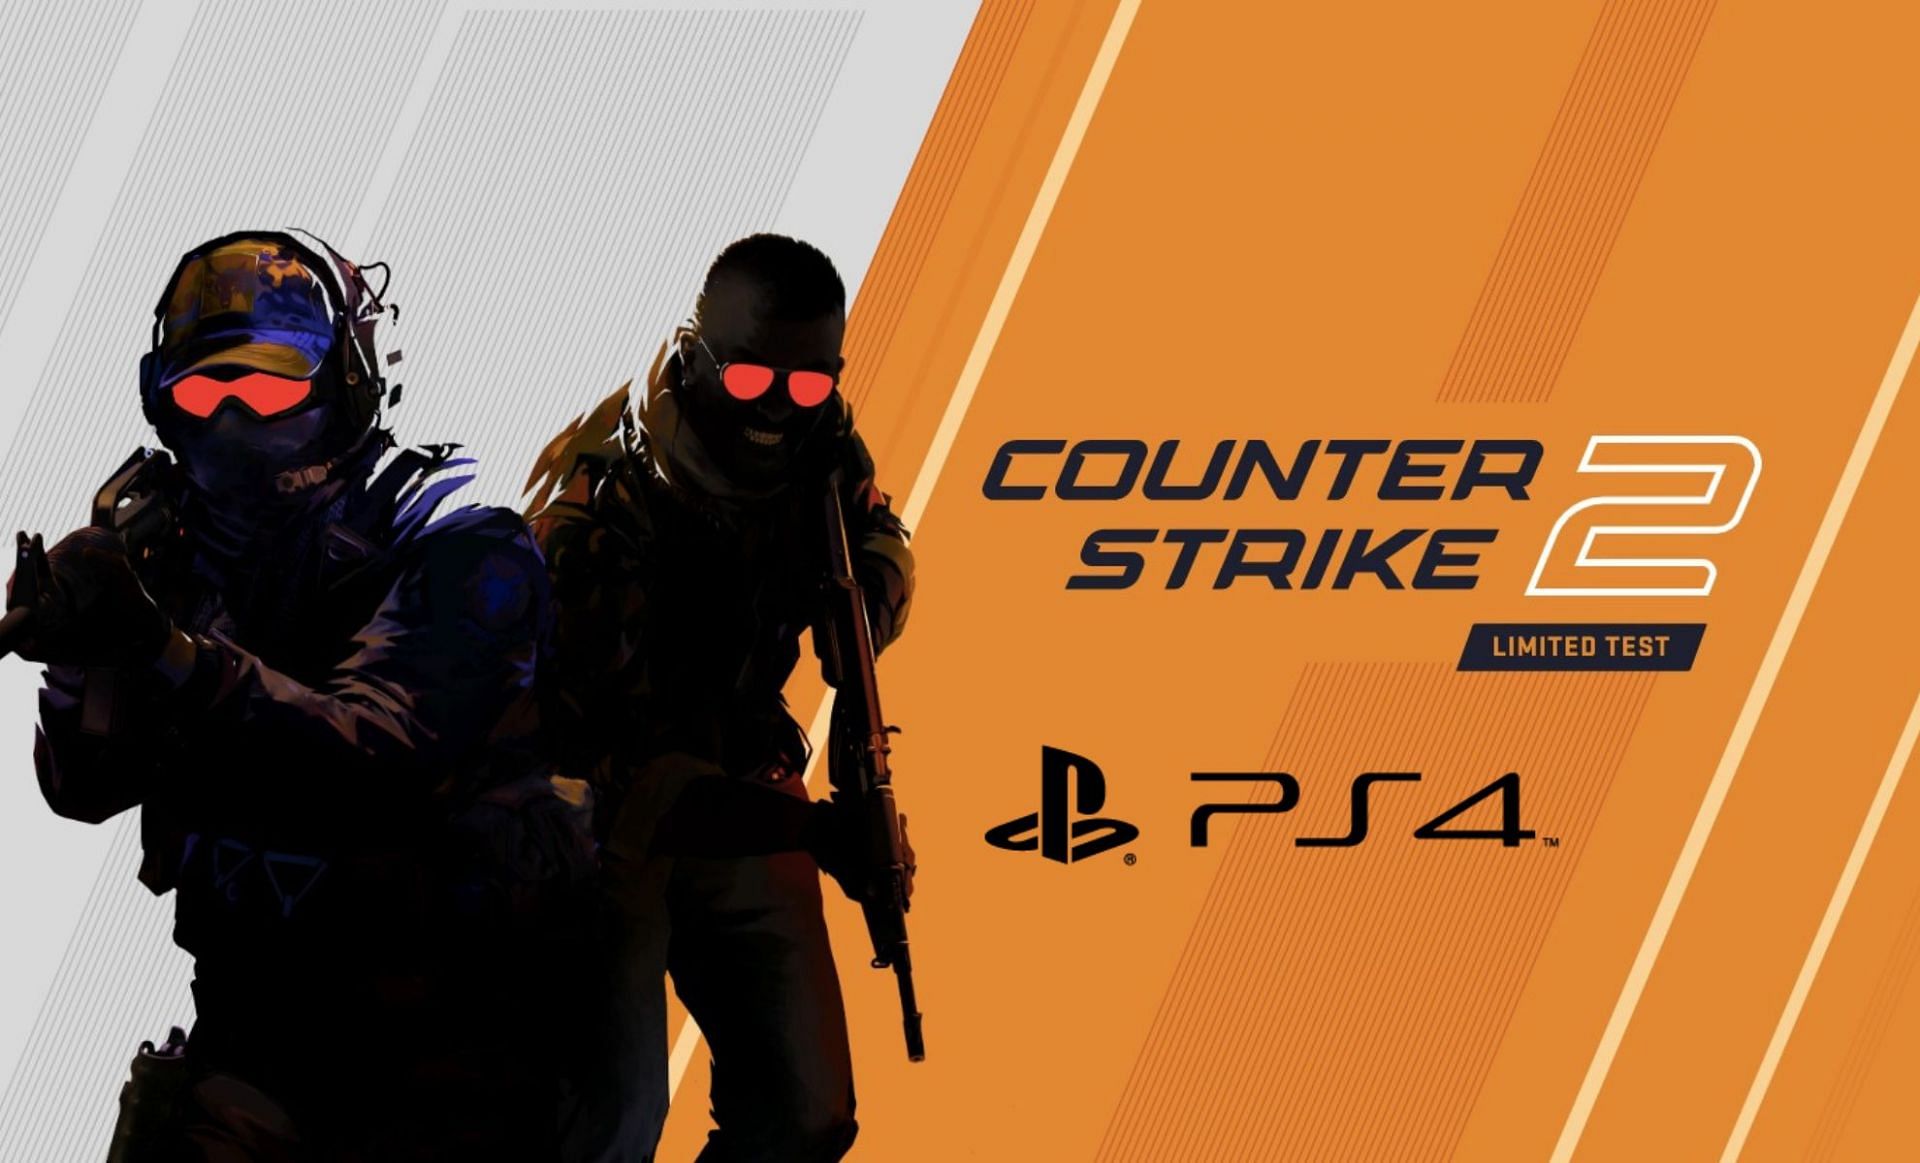 Is Counter-Strike 2 coming to PS5 and PS4 consoles?